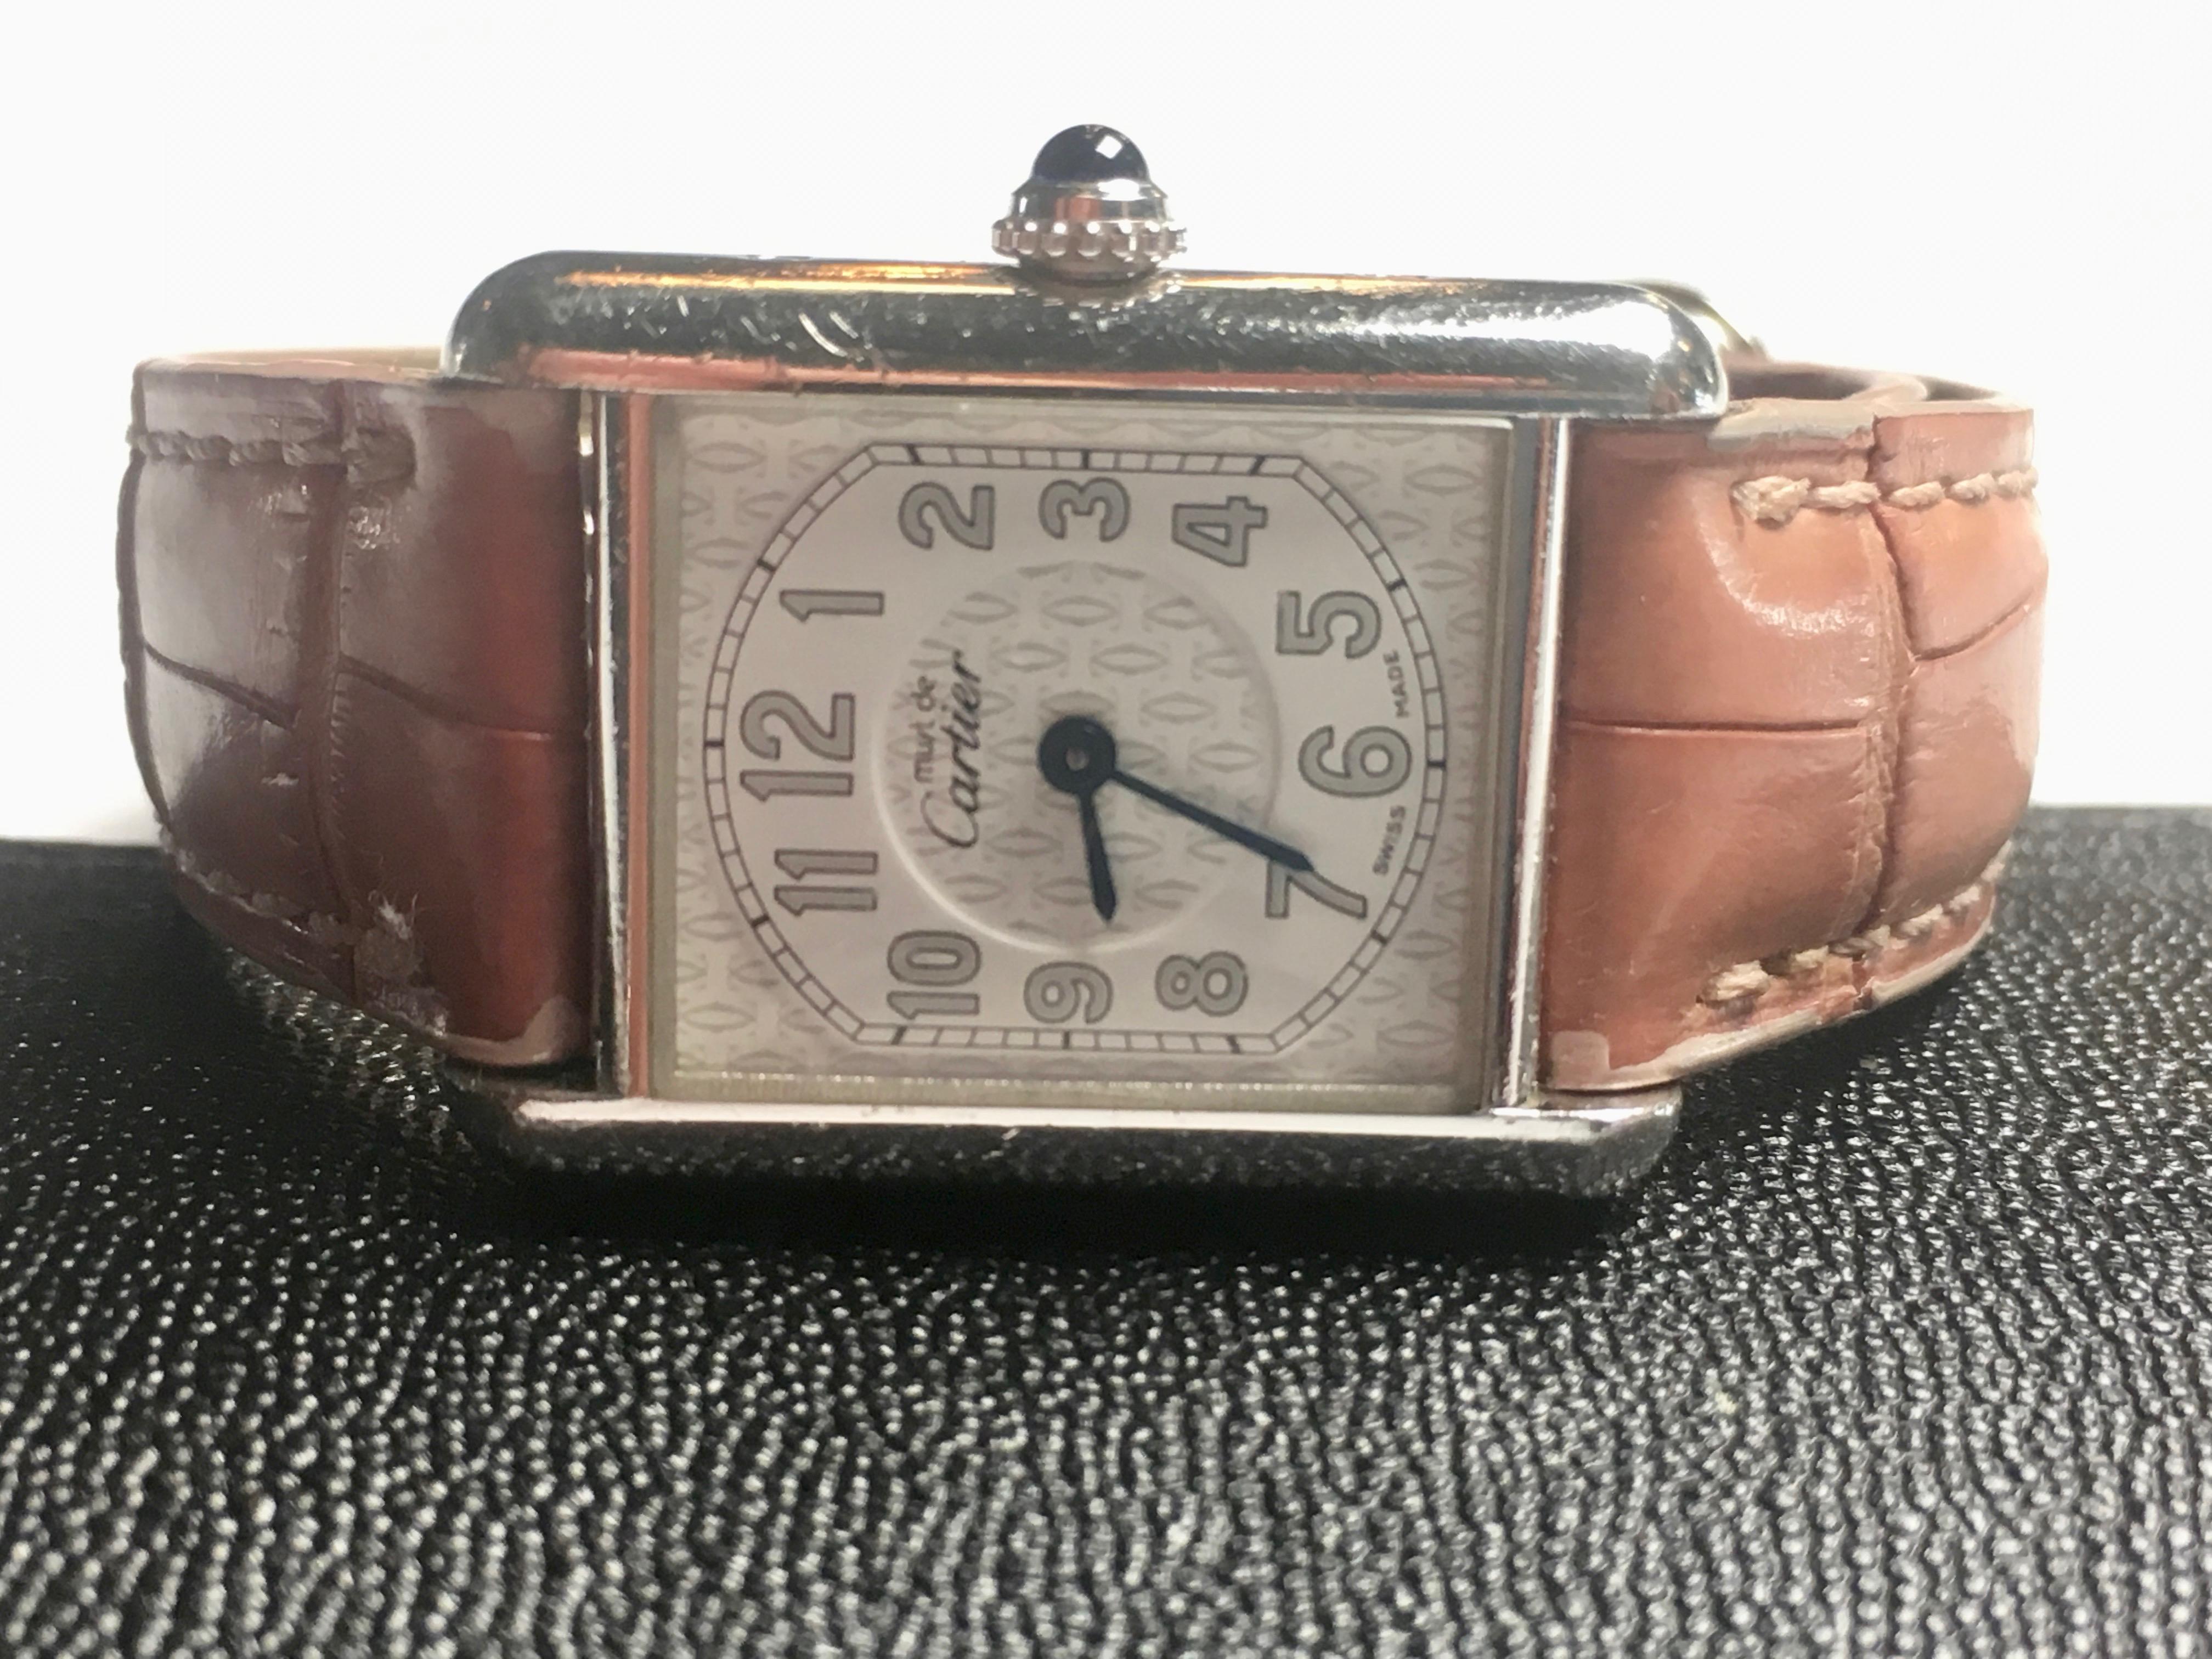 Classic Must de Cartier tank wristwatch made of Sterling Silver. Circa 2006. Pink crocodile band. Quartz movement with deployment buckle. Model 2416. Serial number, model number and Cartier logo engraved on case. Sold with original COA along with